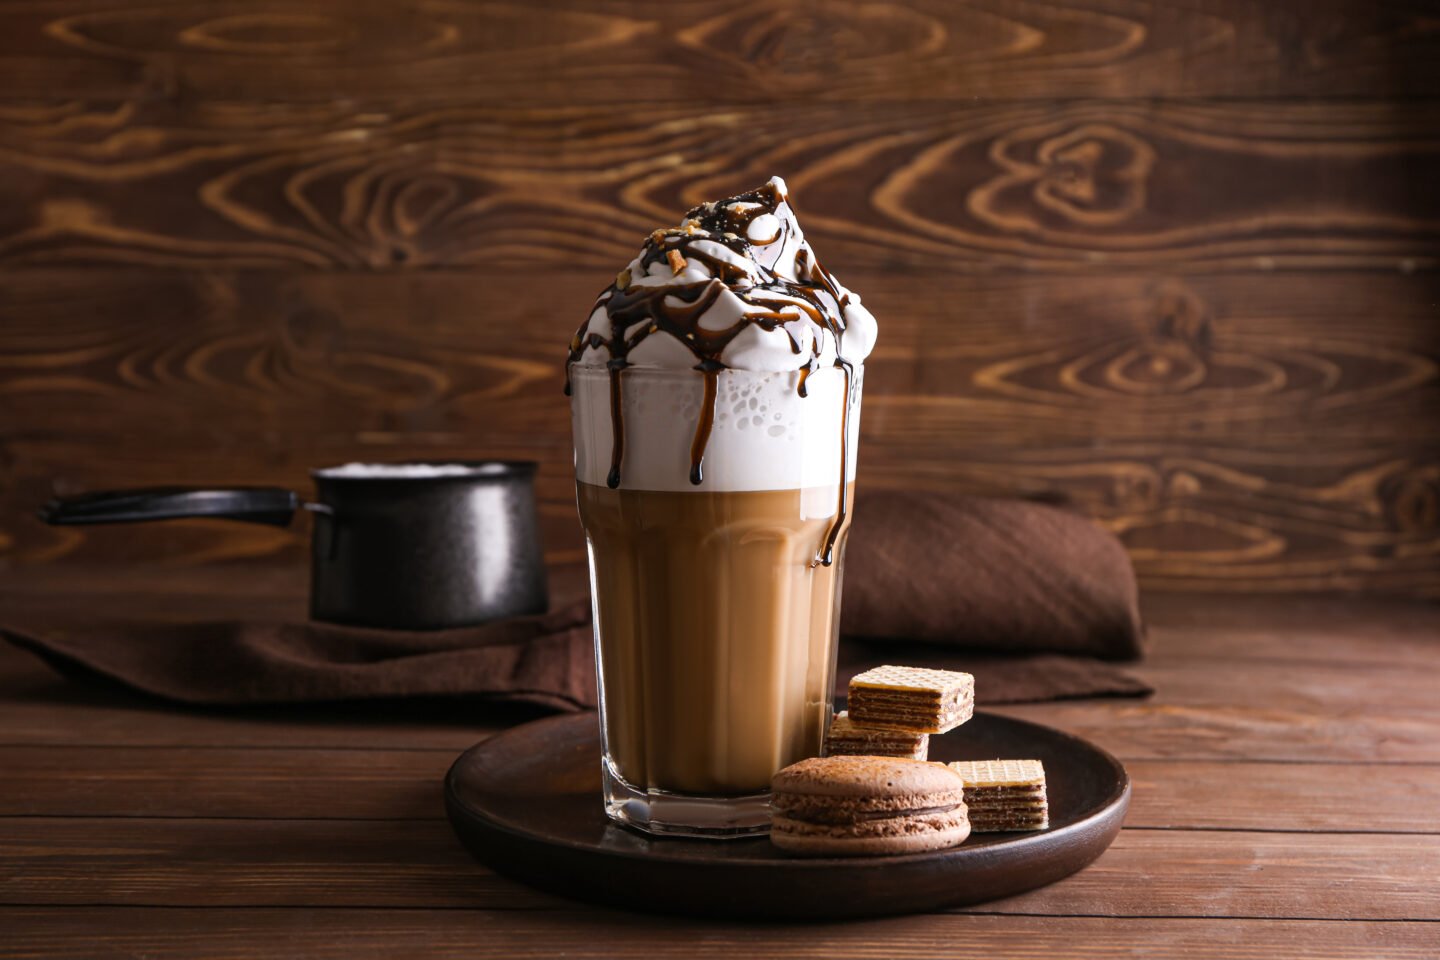 Glass,Of,Tasty,Frappe,Coffee,With,Sweets,On,Wooden,Table